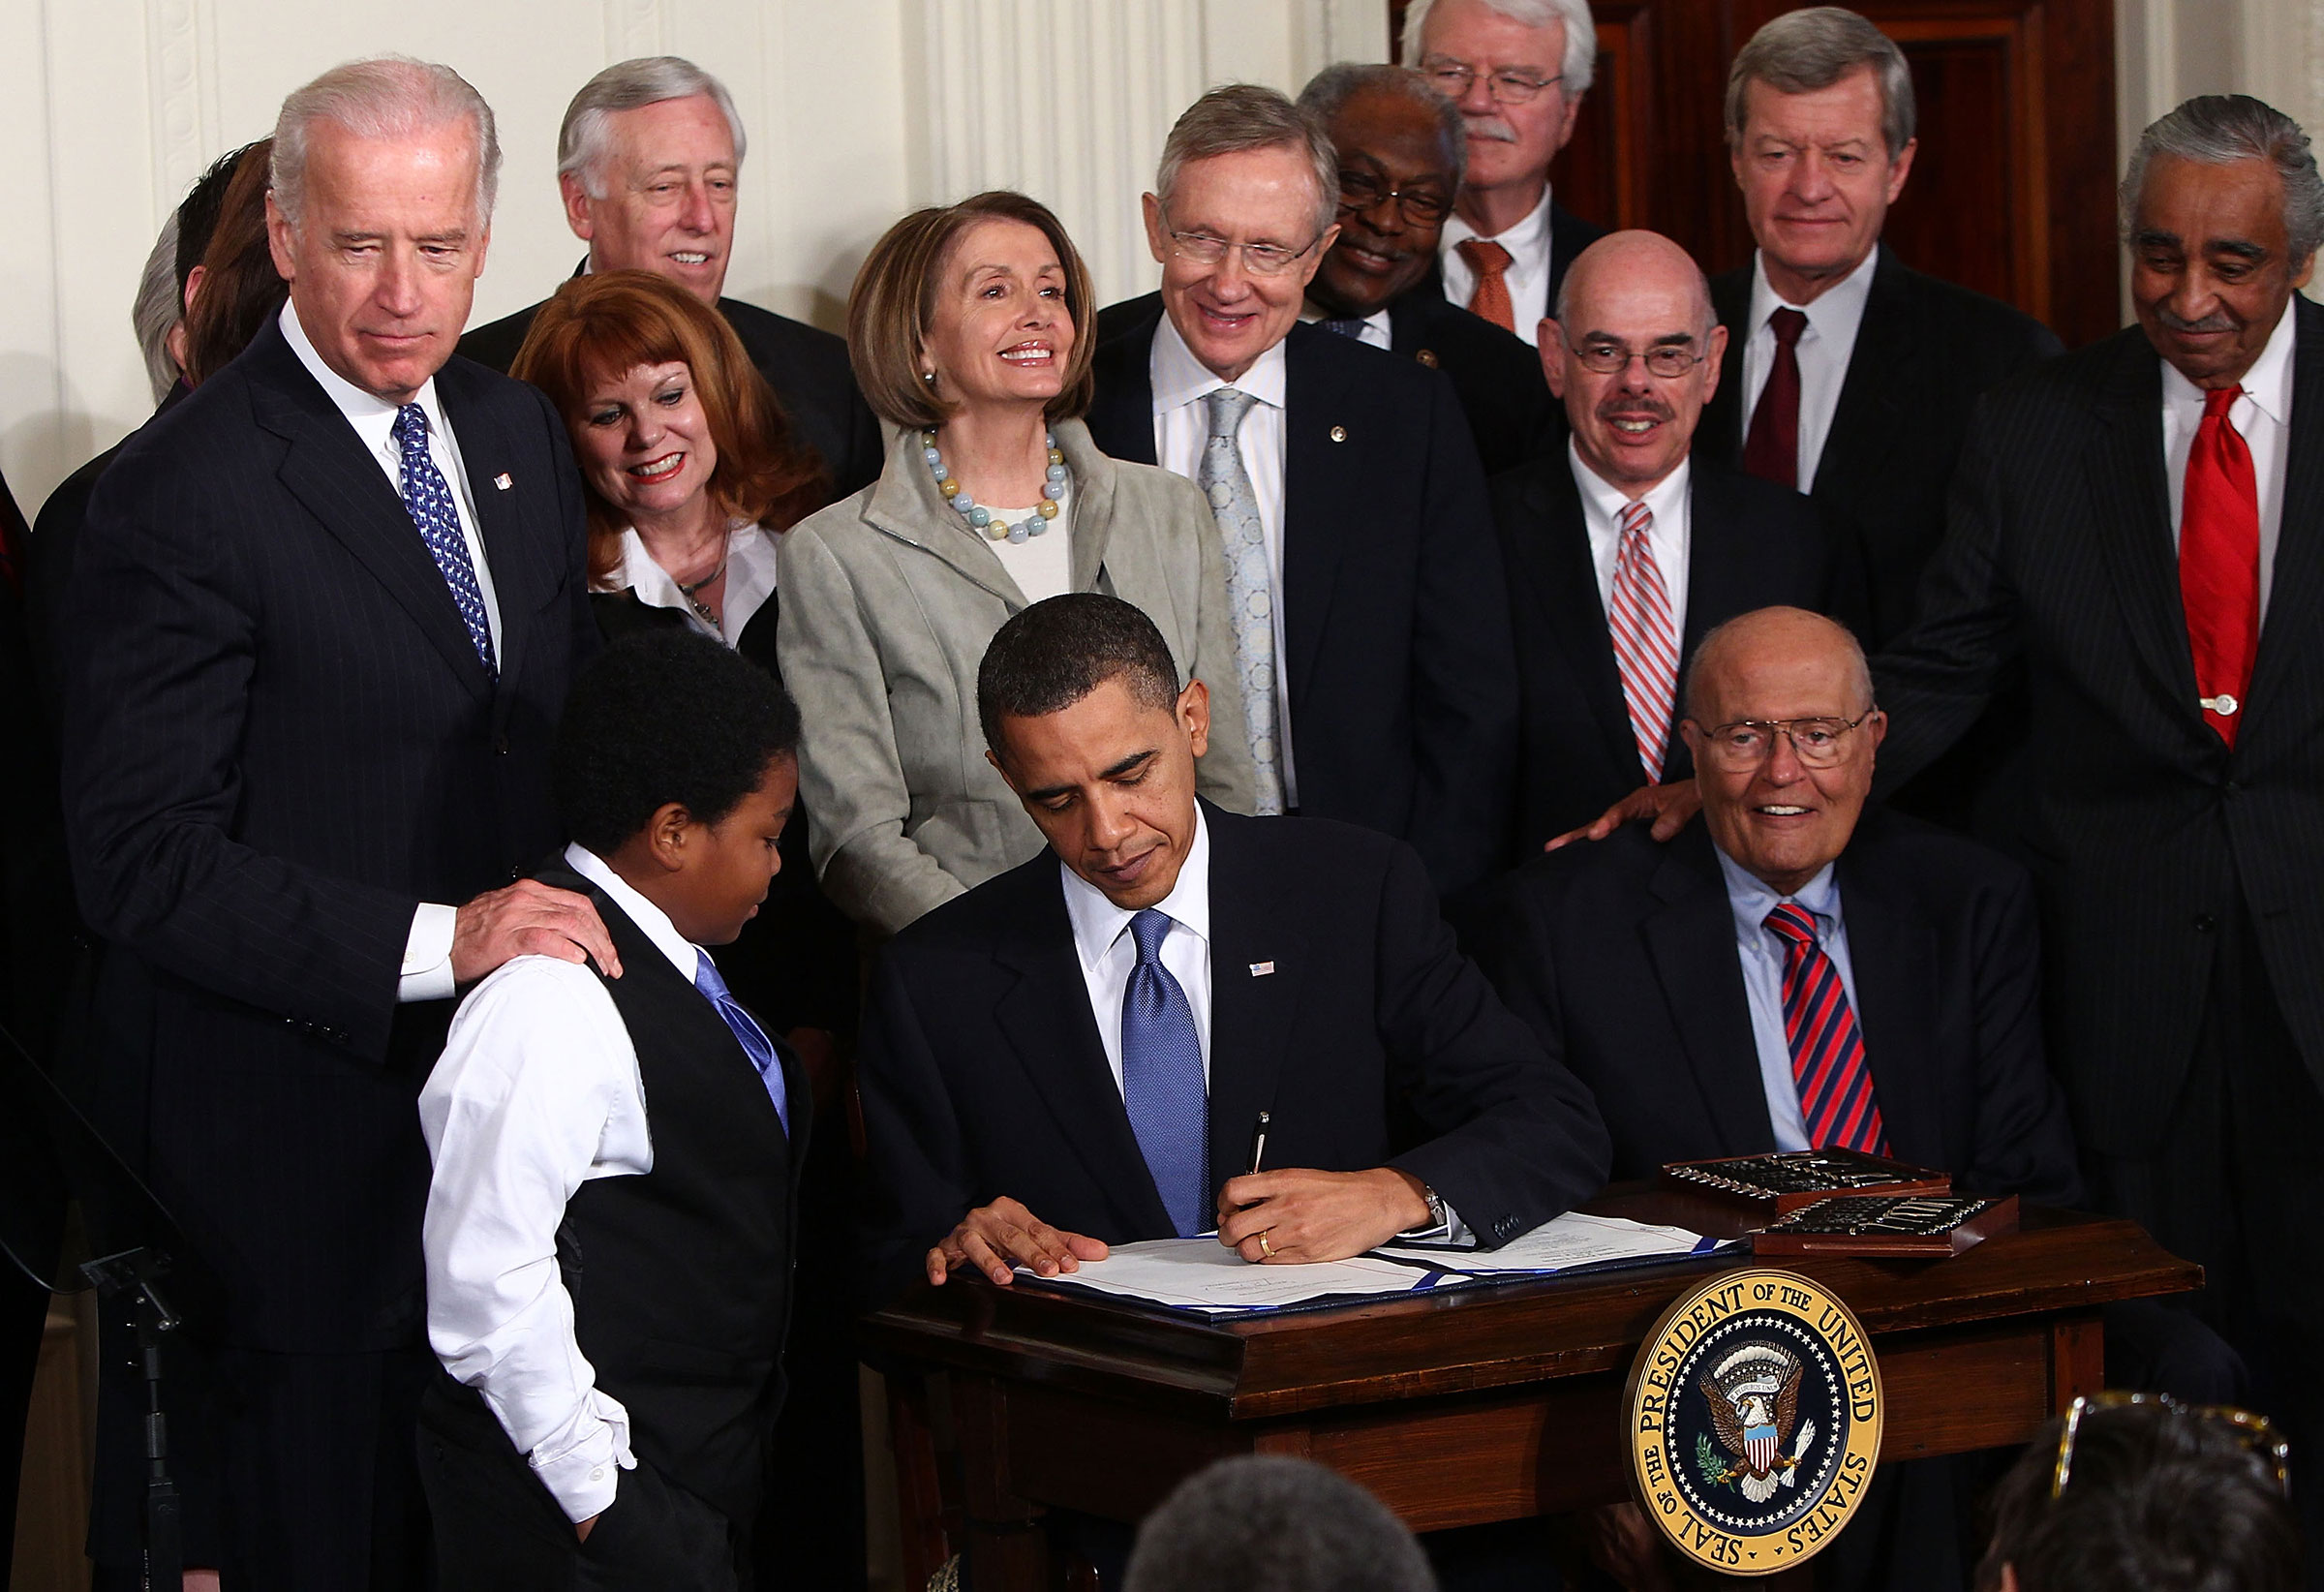 President Barack Obama signs the Affordable Health Care for America Act during a ceremony